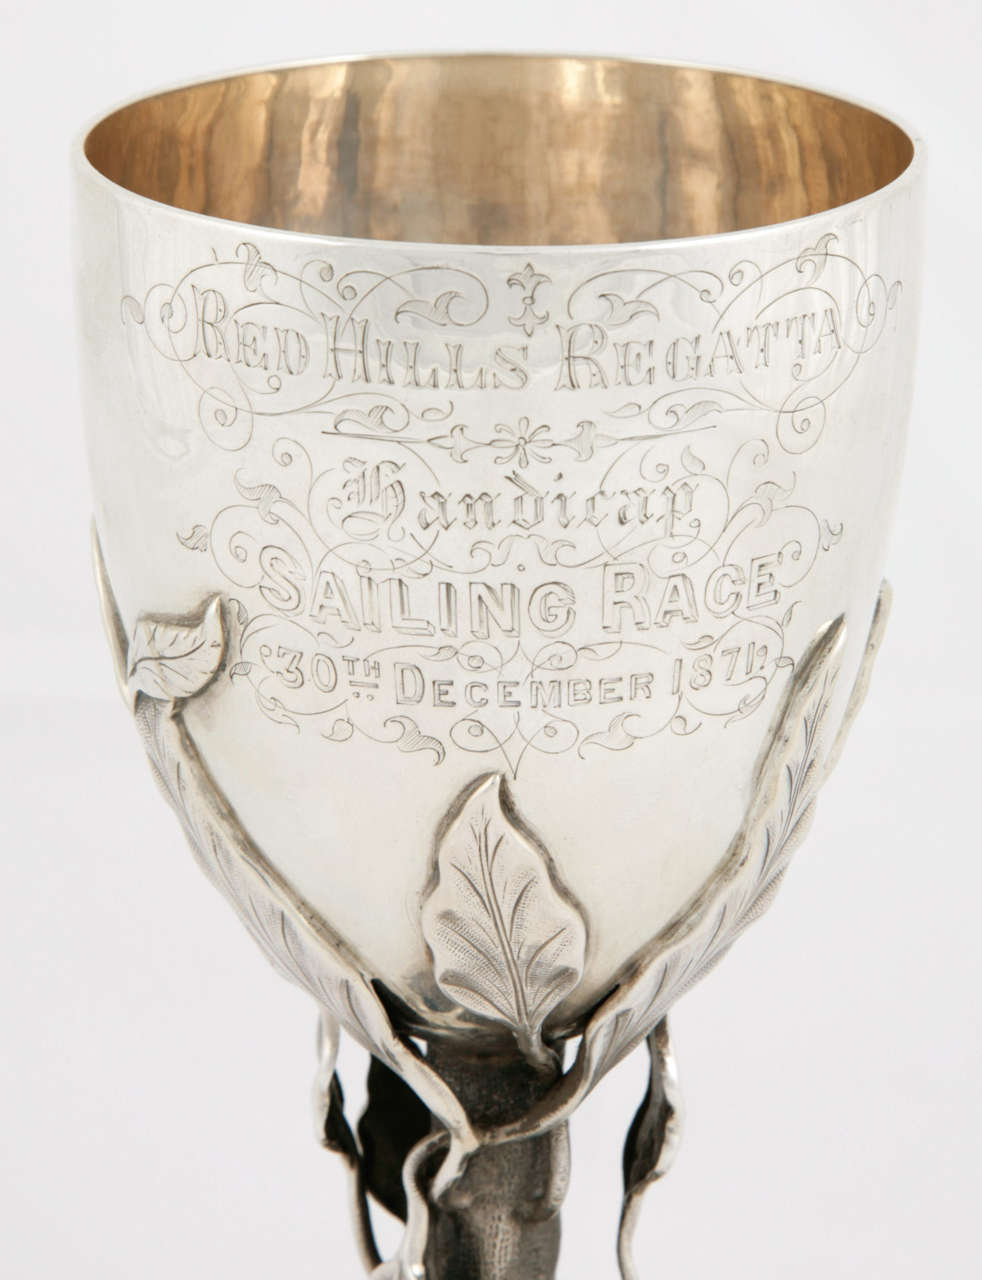 This very unusual silver goblet is Indian Colonial, made by Orr of Madras, circa 1870. It is 17.4 cm high and weighs 324 gms.
There is engraving to either side, one with the initials of the presenter of the prize, and the other reading
